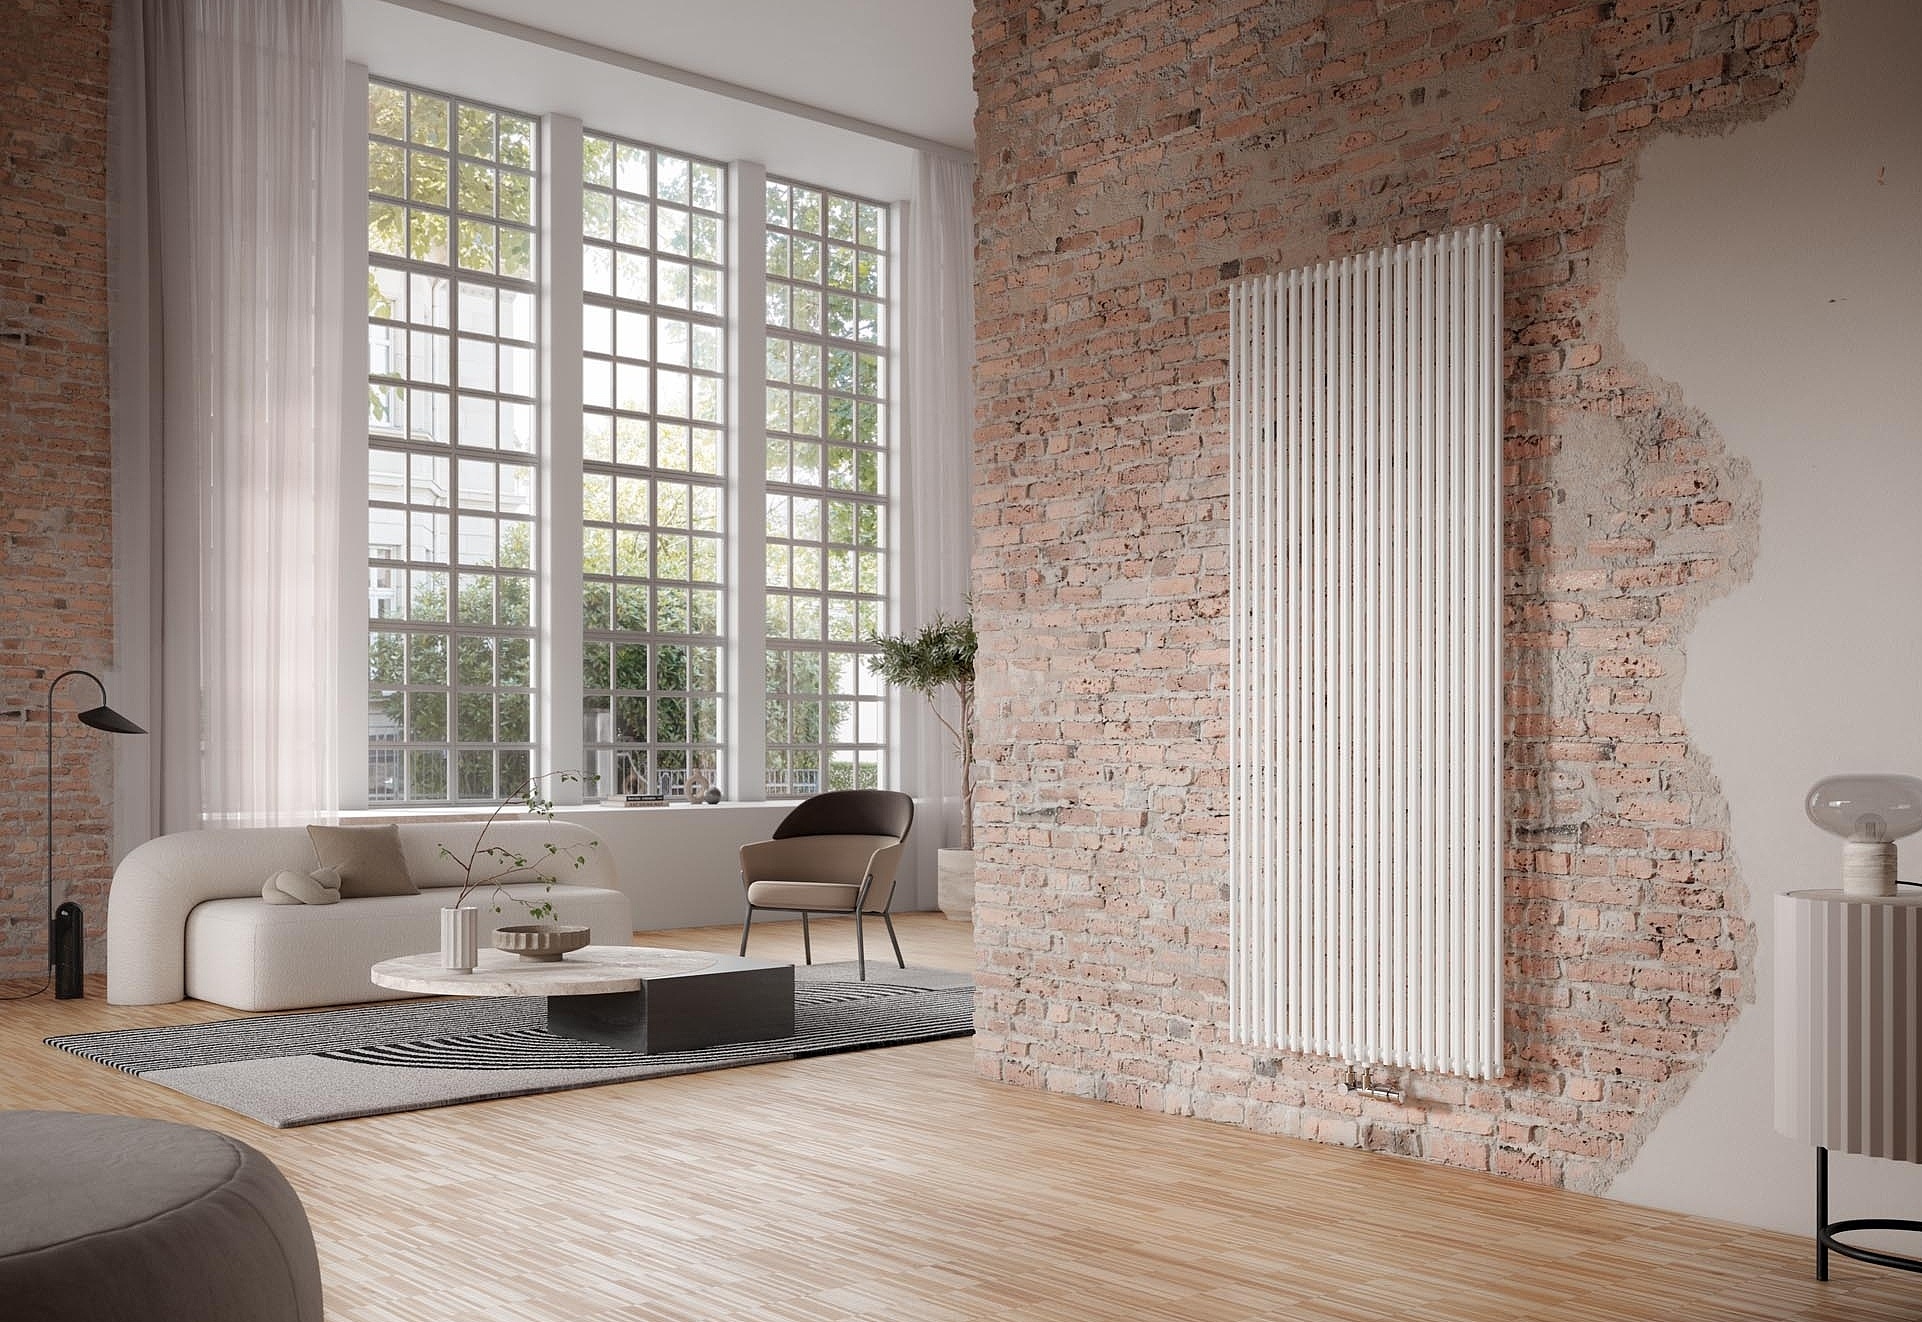 Kermi Pio design and bathroom radiators for all residential and property projects.